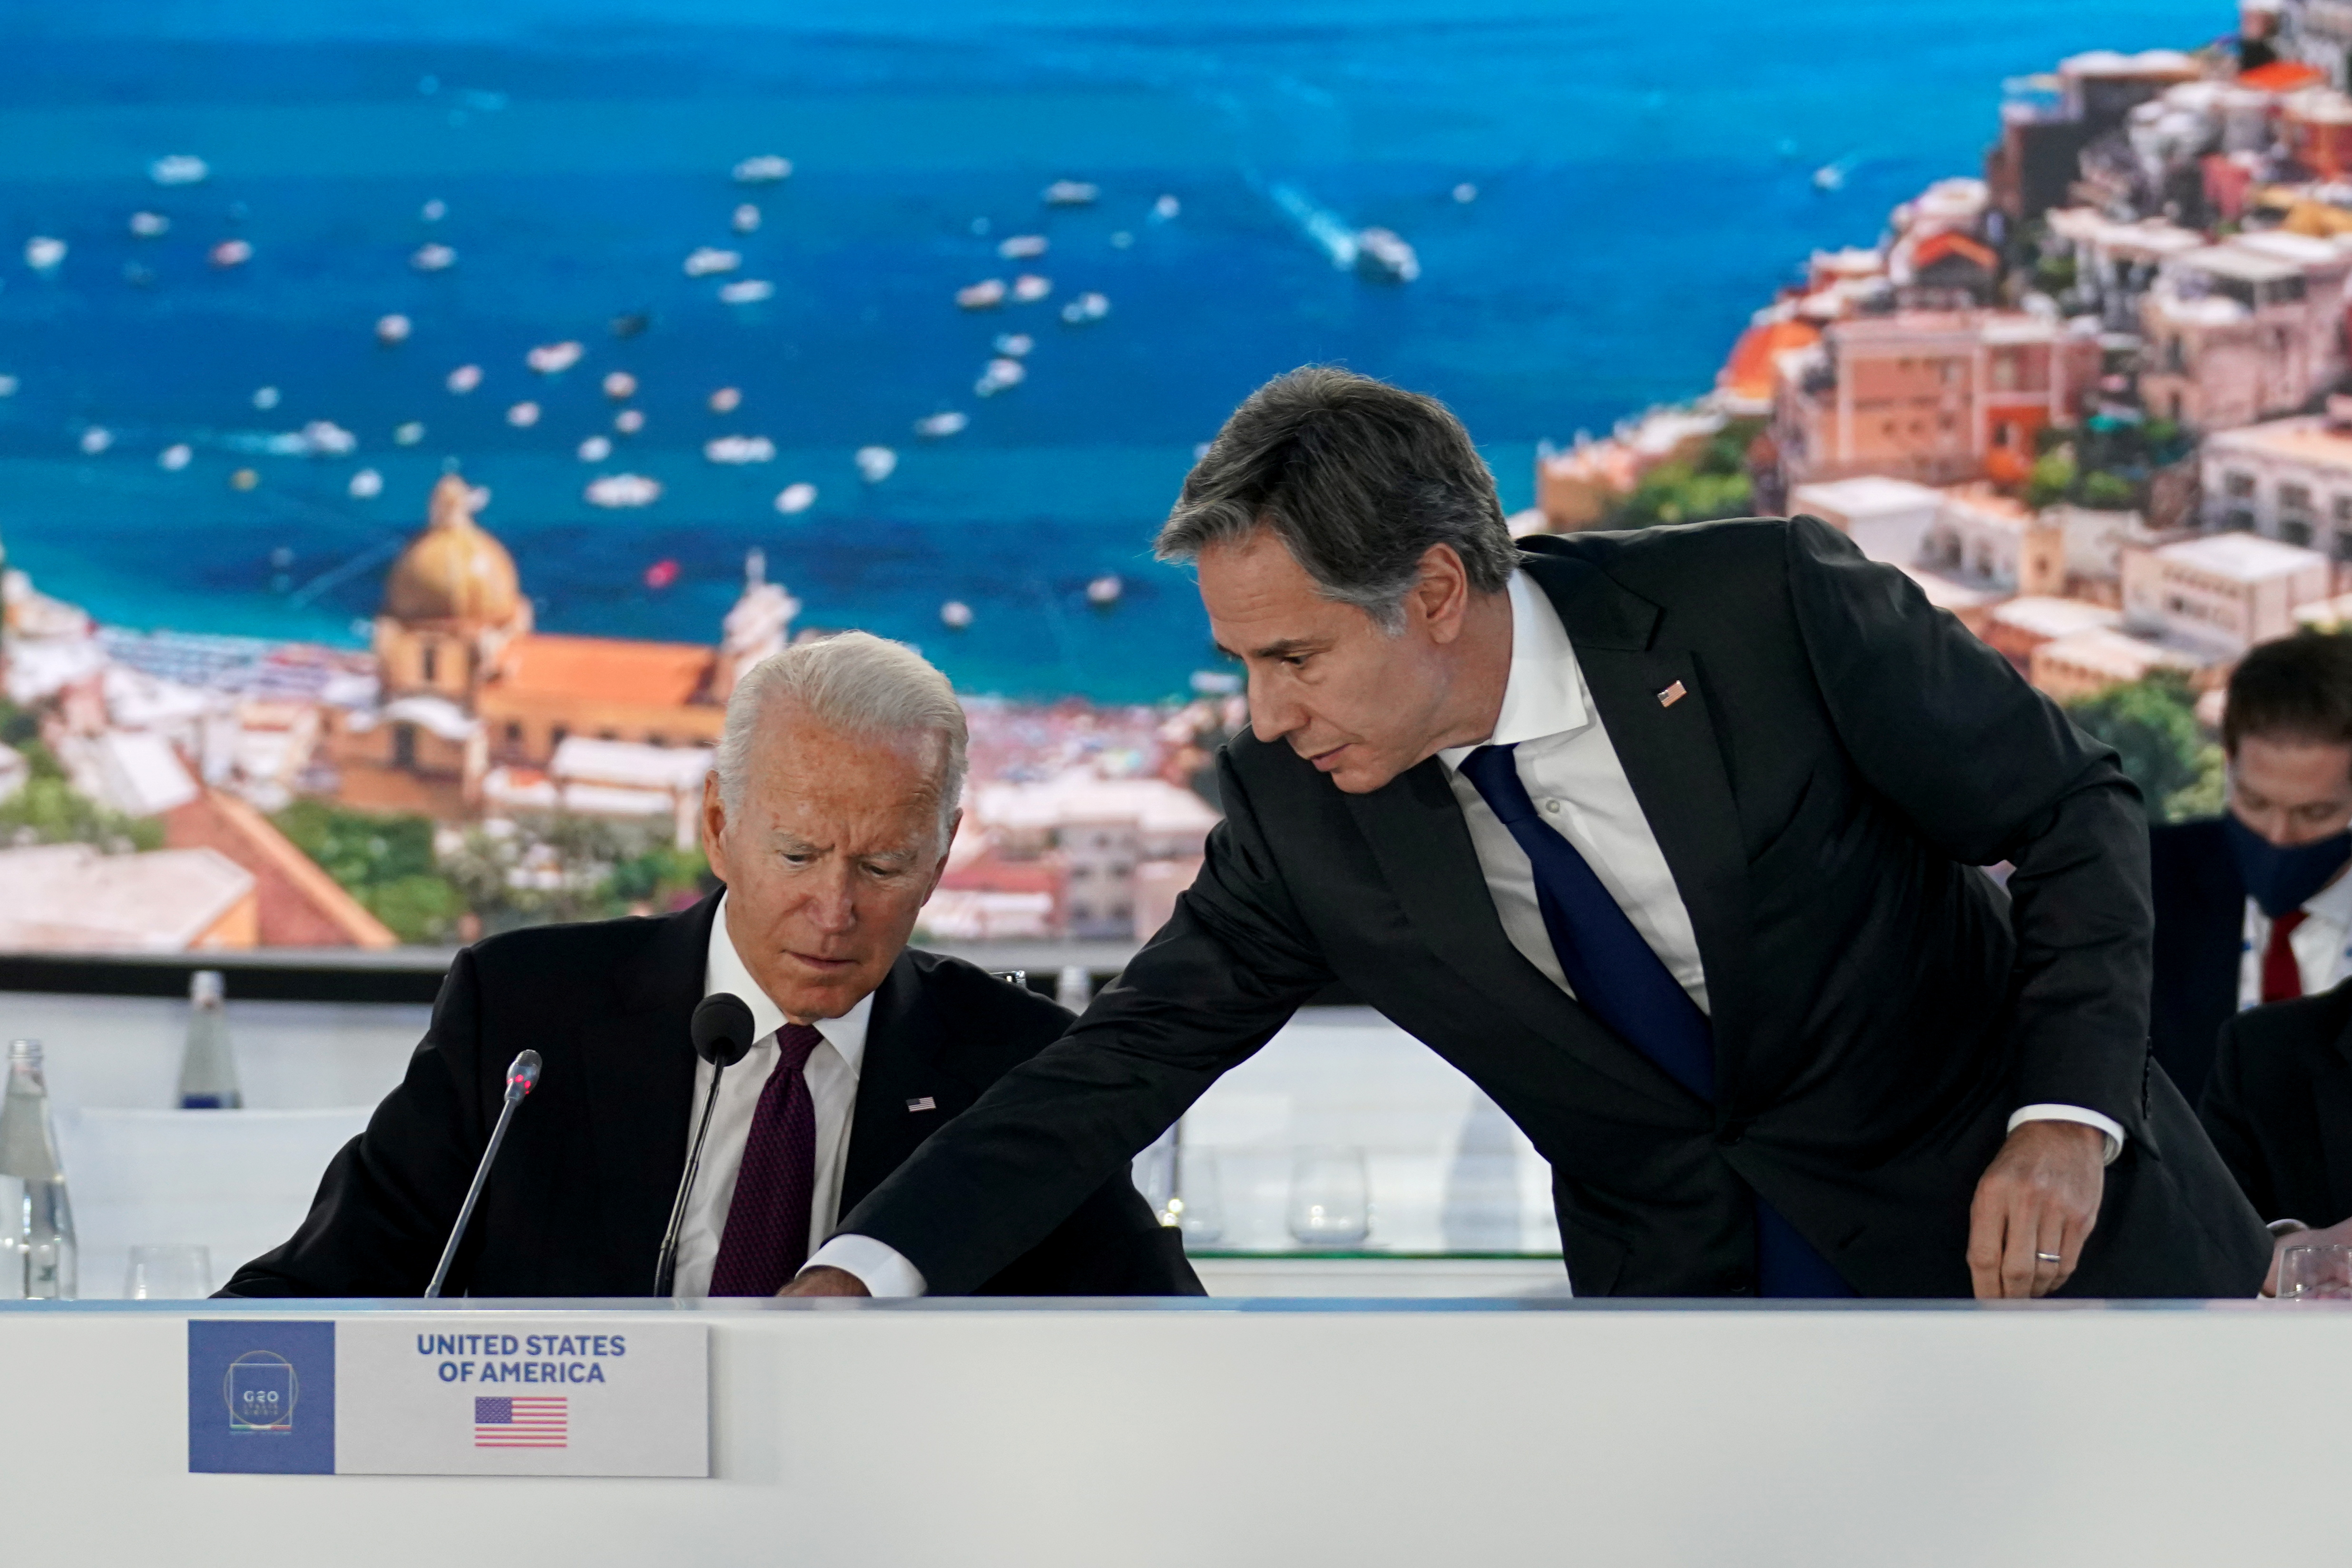 U.S. Secretary of State Antony Blinken adjusts a microphone for U.S. President Joe Biden as he hosts an event on global supply chain resilience through the coronavirus disease (COVID-19) pandemic and recovery, on the sidelines of the G20 leaders' summit in Rome, Italy October 31, 2021. REUTERS/Kevin Lamarque